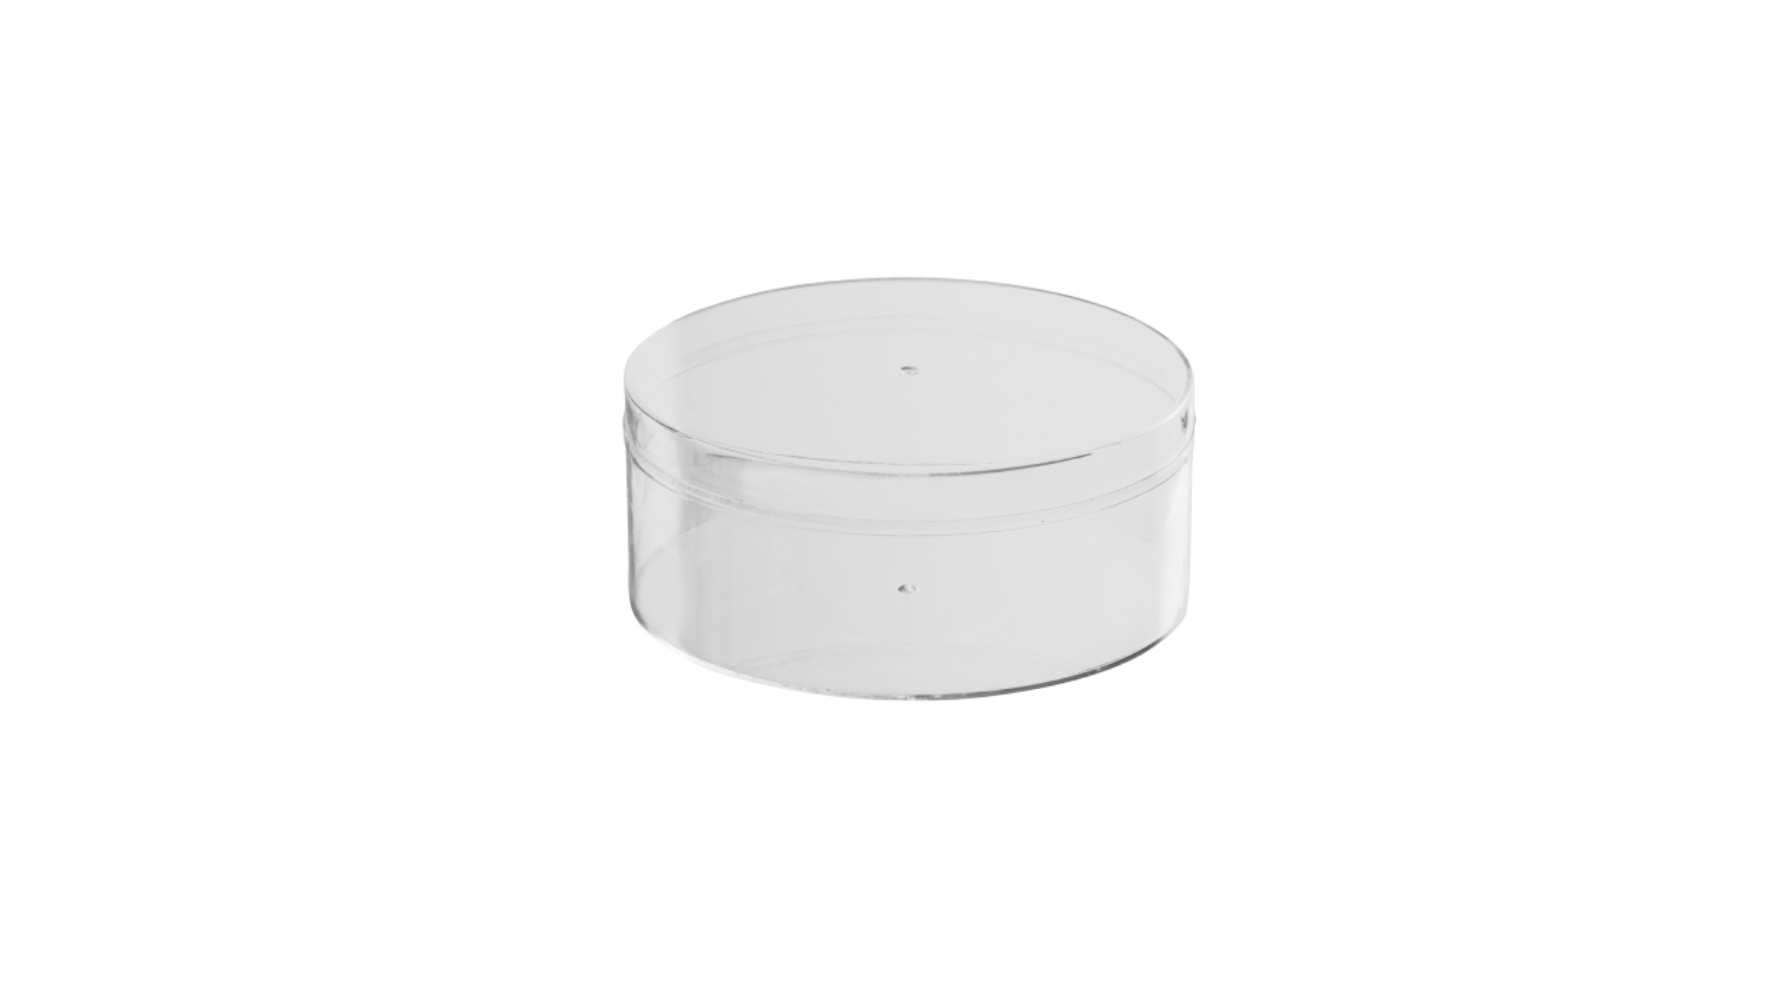 Hammont Clear Acrylic Boxes Round 4.75X2.1 16 Pack - Clear - 8